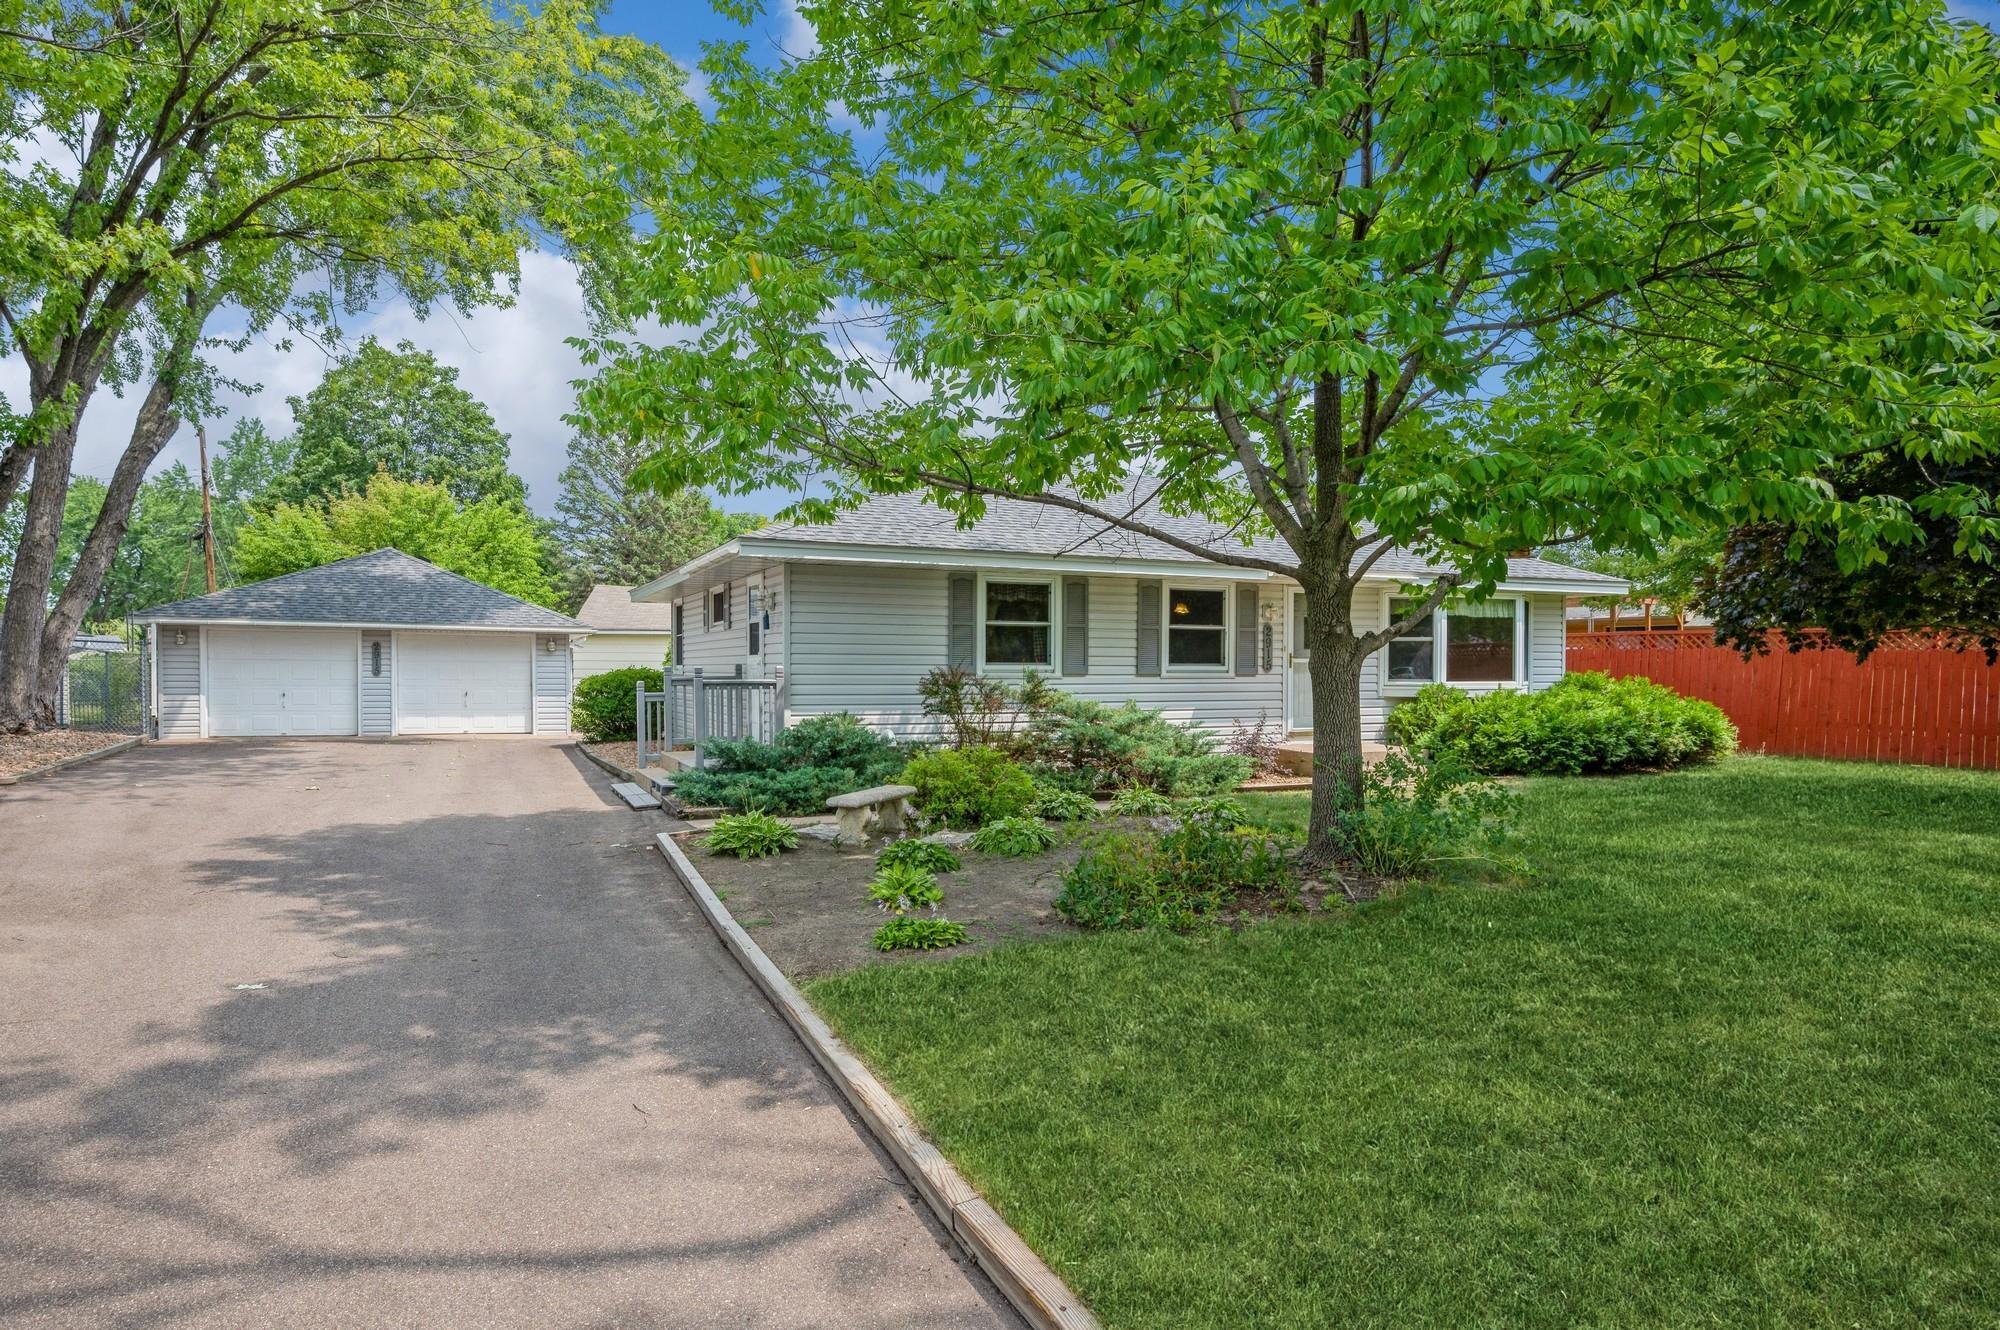 New Listing Coming Soon On Friday July 28th in Coon Rapids